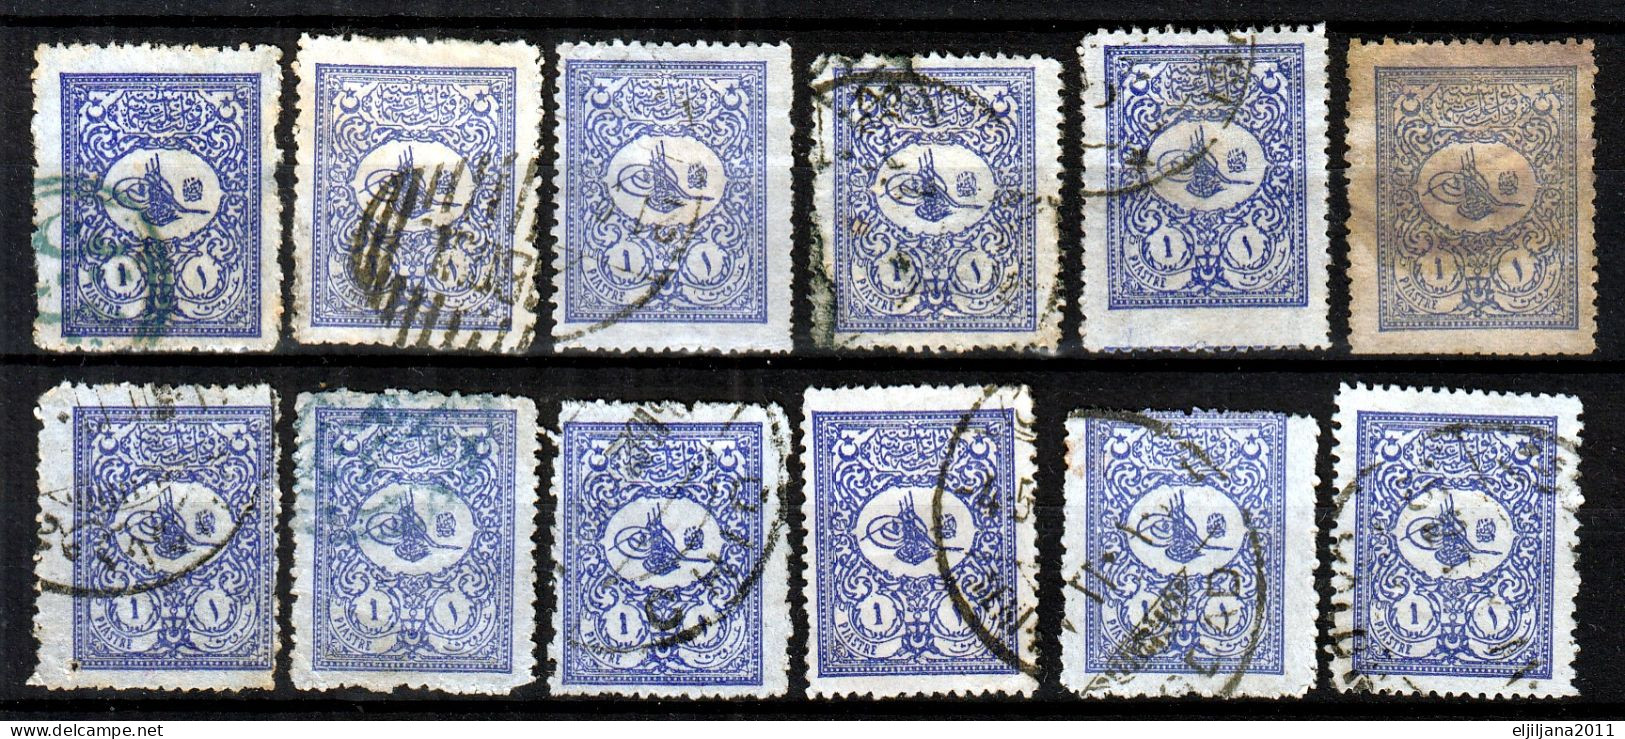 ⁕ Turkey 1901 - 1905 ⁕ Tughra Of Abdul Hamid II. / Coat Of Arms / Foreign Post, 1 Pia. Mi.103 ⁕ 24v Used - Used Stamps